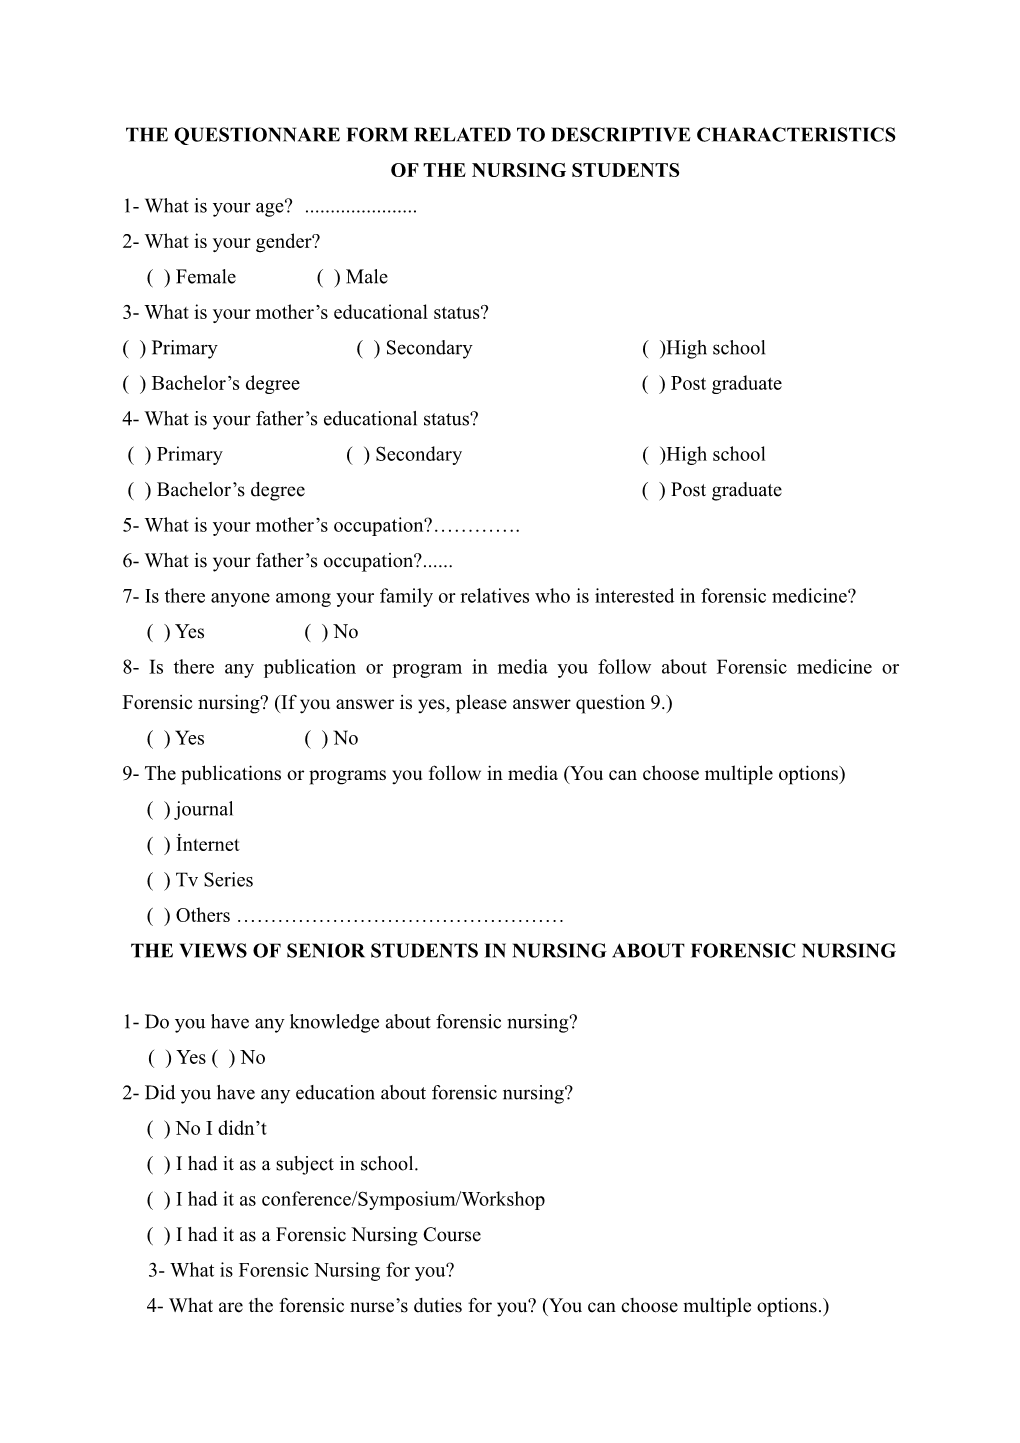 The Questionnare Form Related to Descriptive Characteristics of the Nursing Students